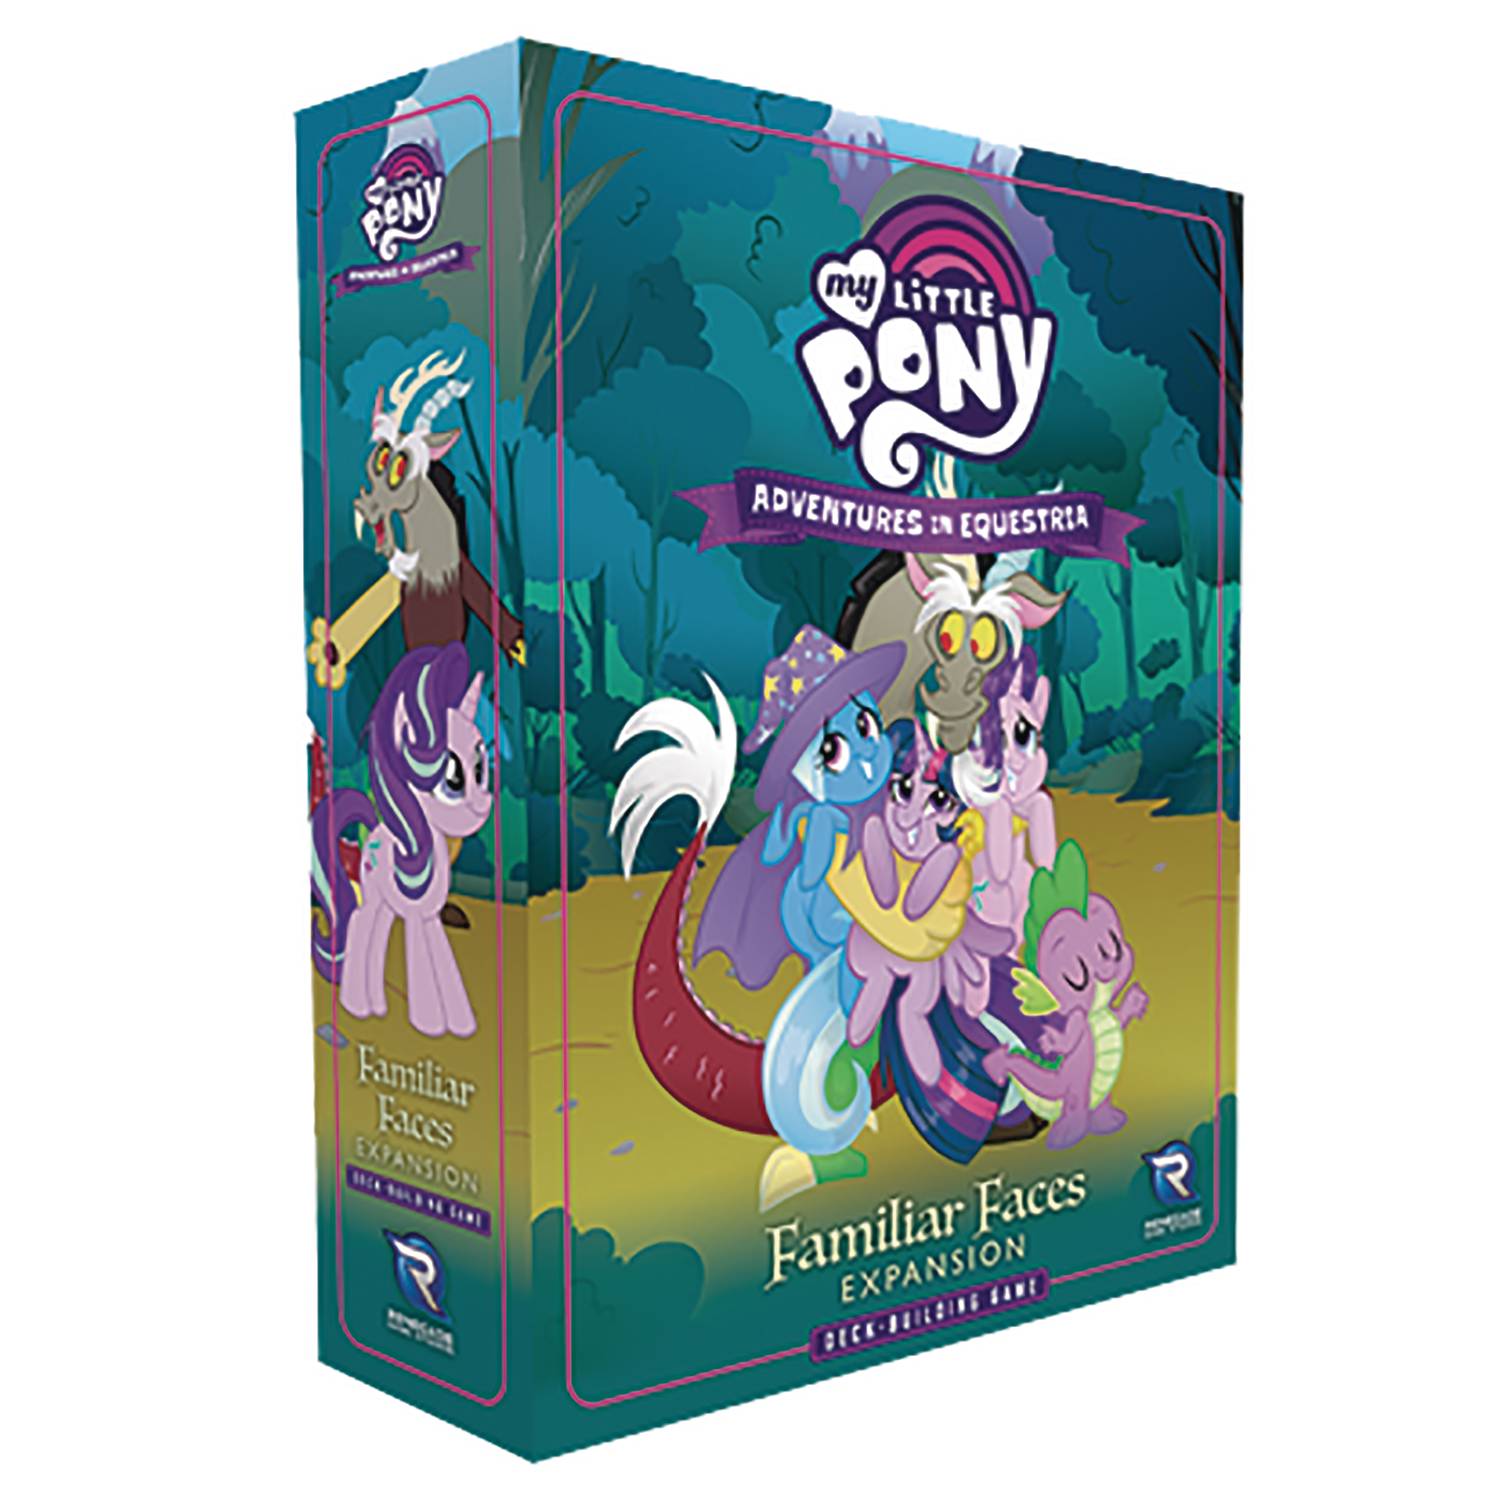 MY LITTLE PONY ADV IN EQUESTRIA DBG FAMILIAR FACES EXP (MAY2